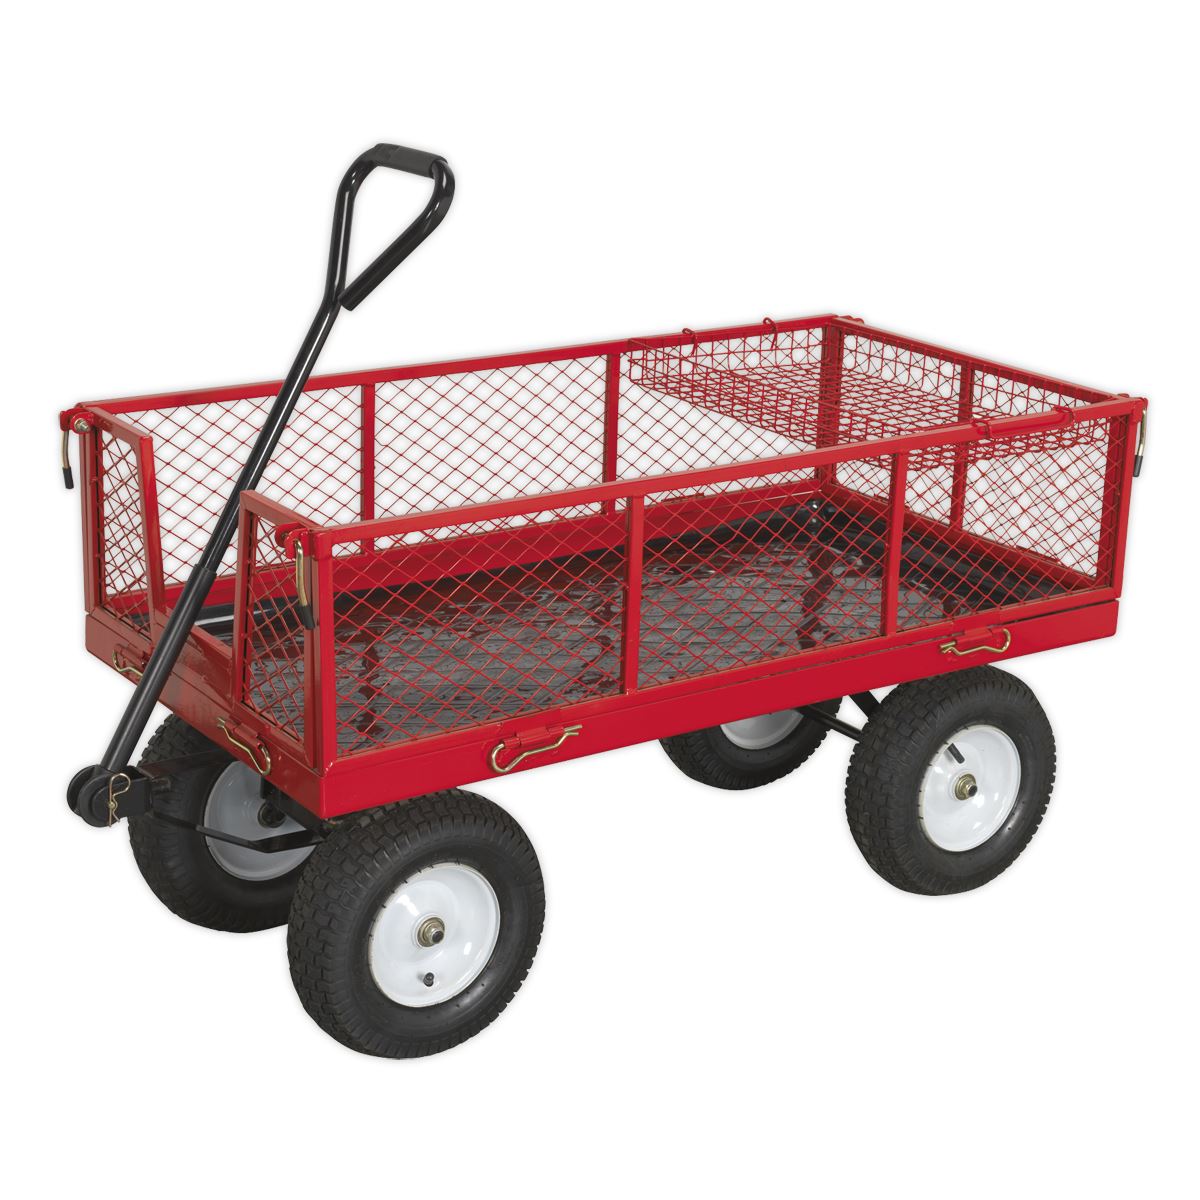 Sealey Platform Truck with Sides Pneumatic Tyres 450kg Capacity